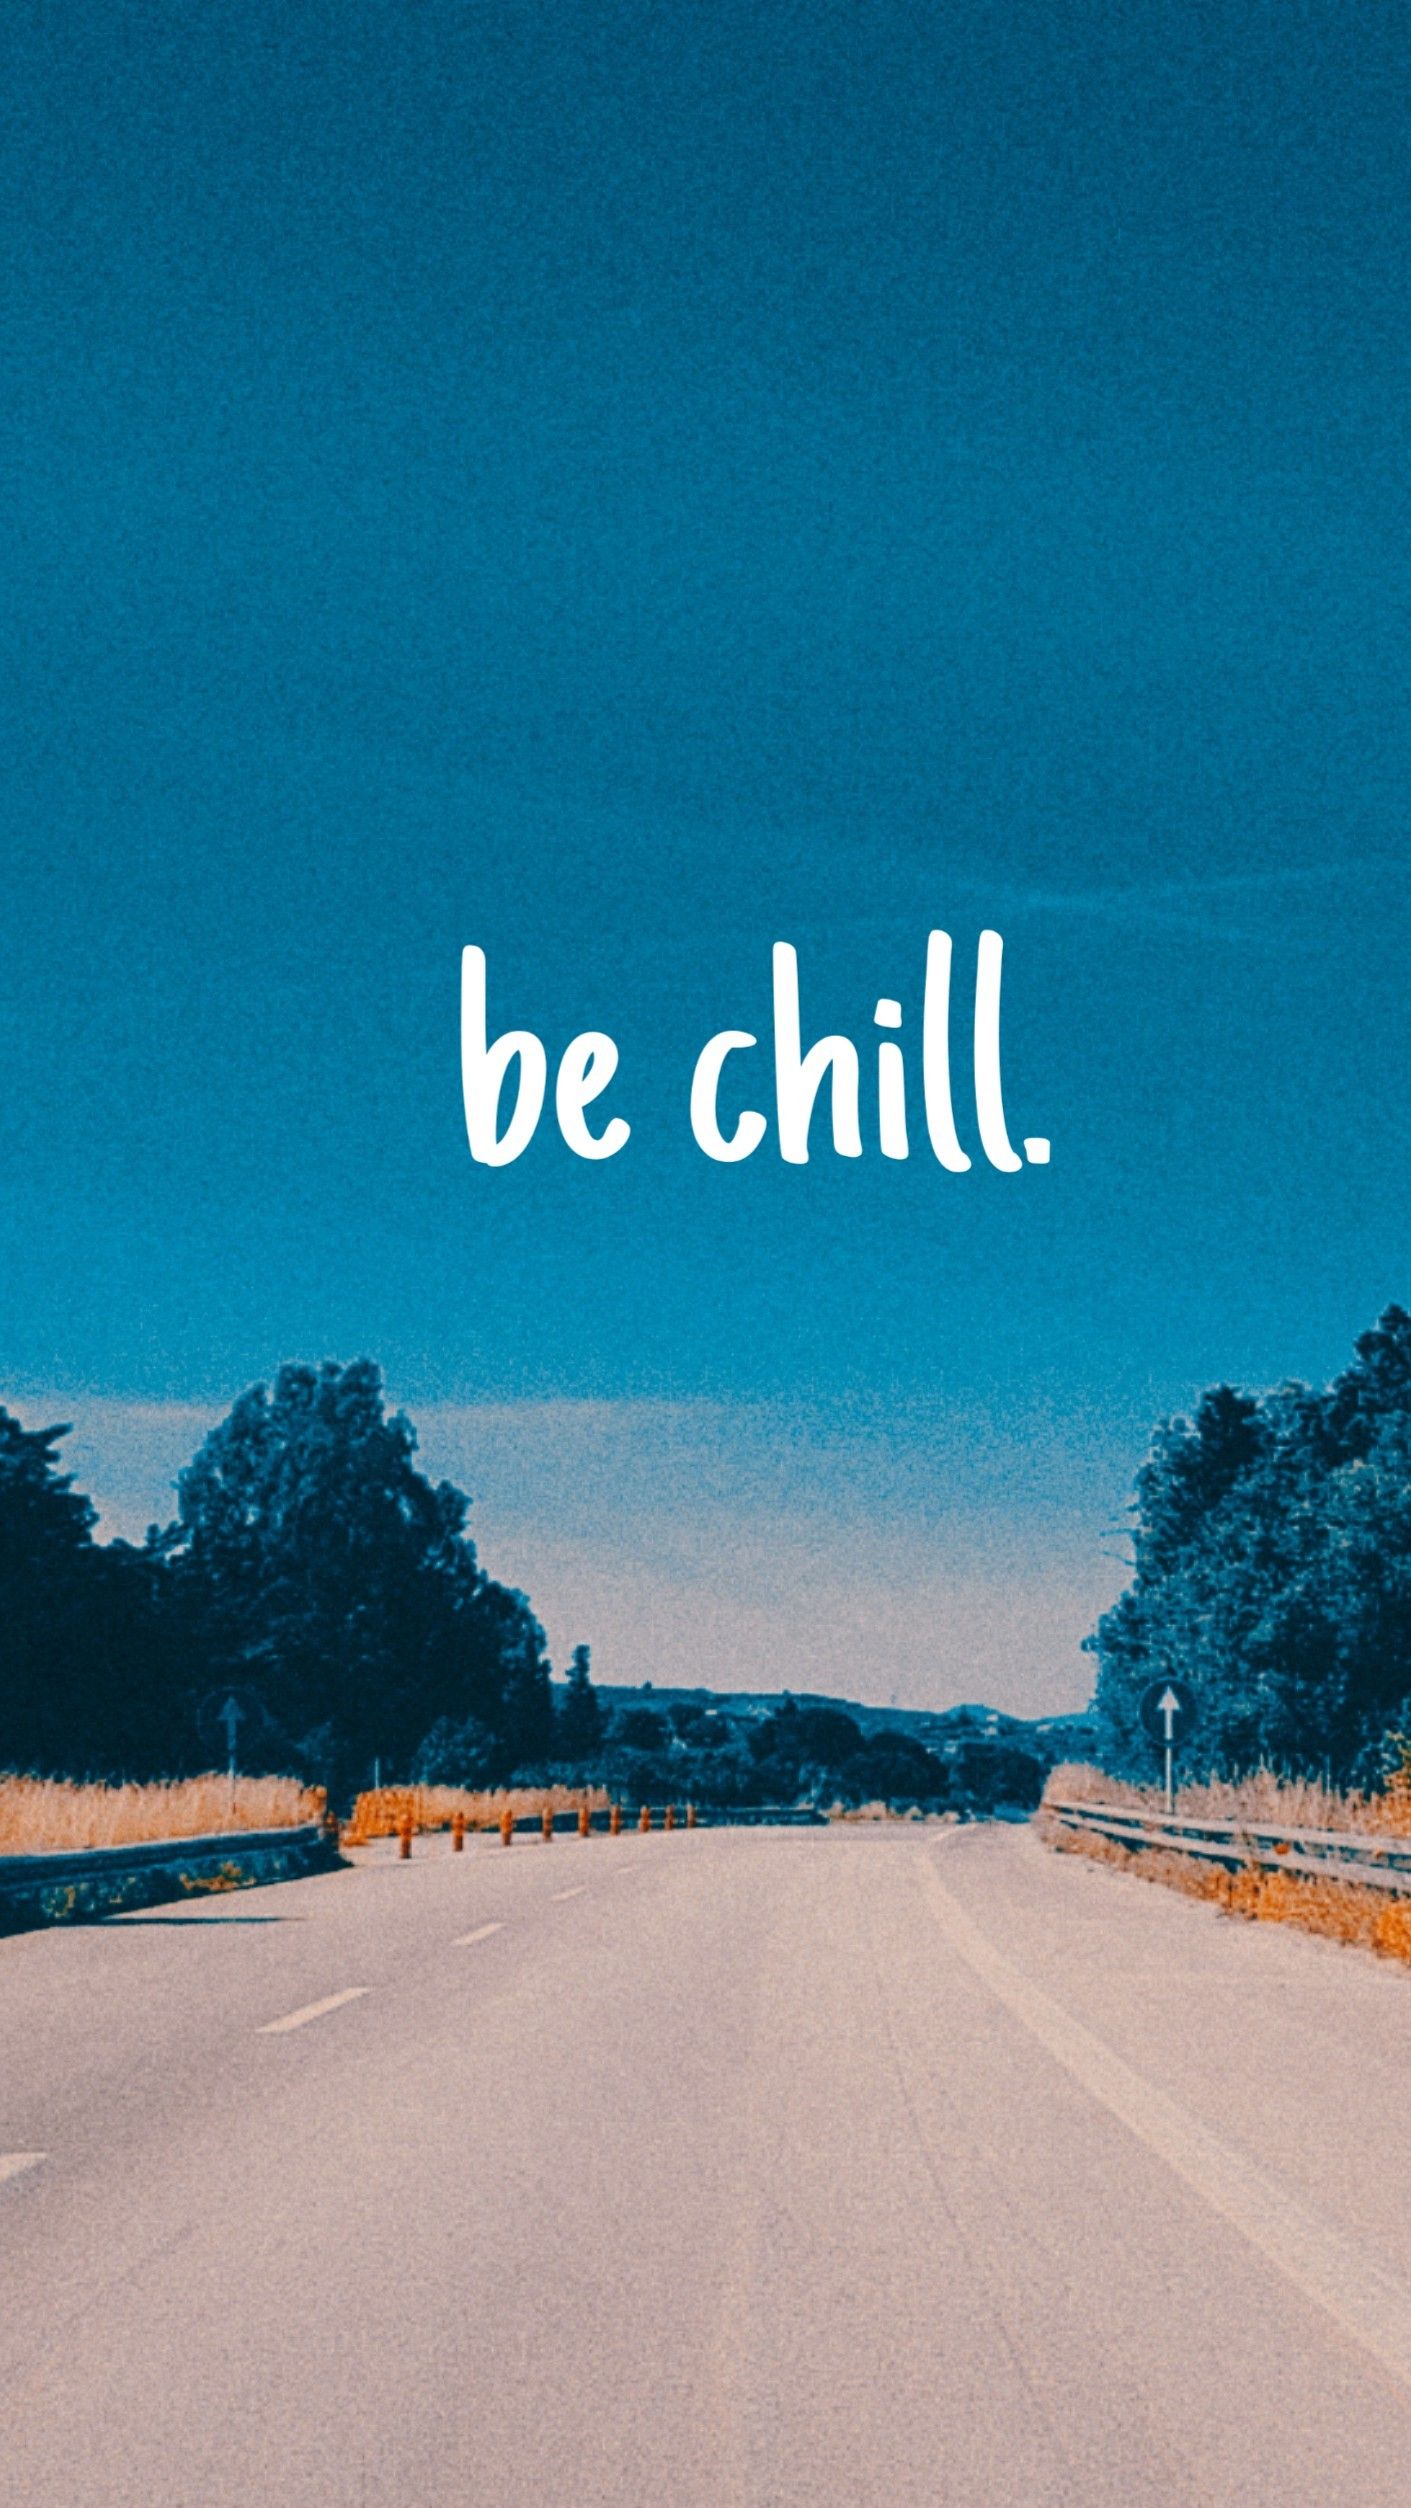 Chill Aesthetic Wallpapers on WallpaperDog